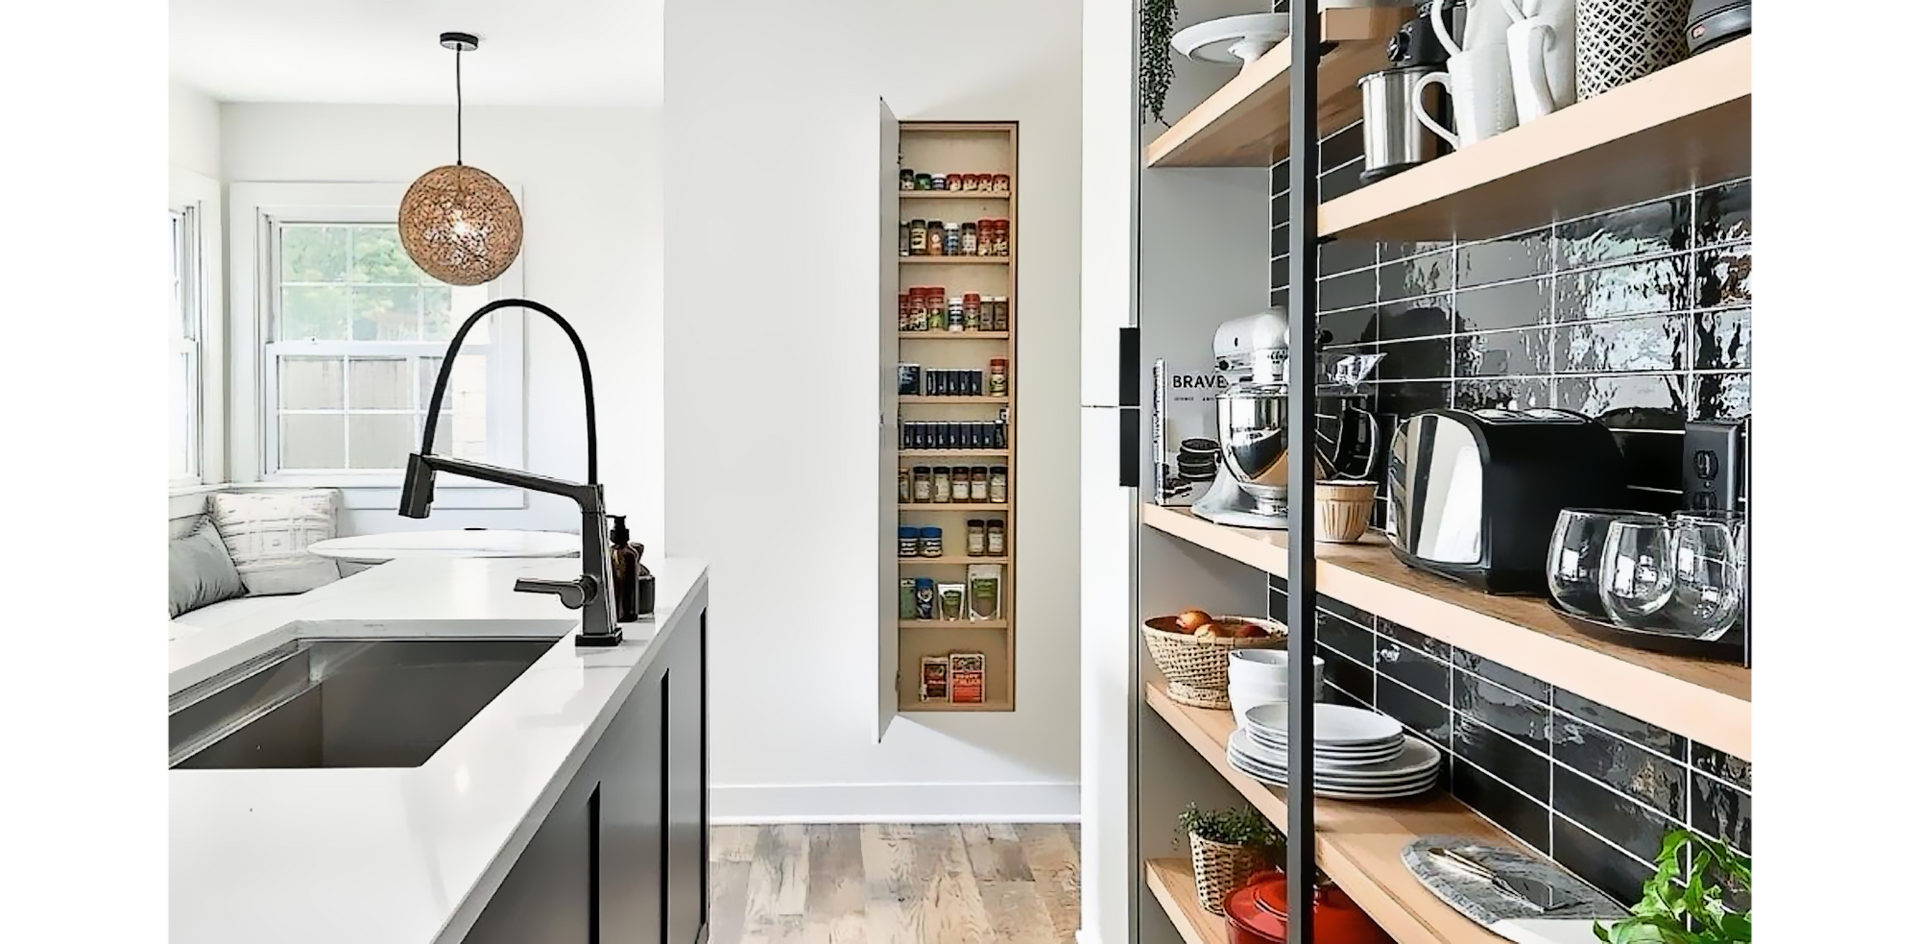 kitchen with small pantry with organizer, pull-down kitchen faucet, open shelving